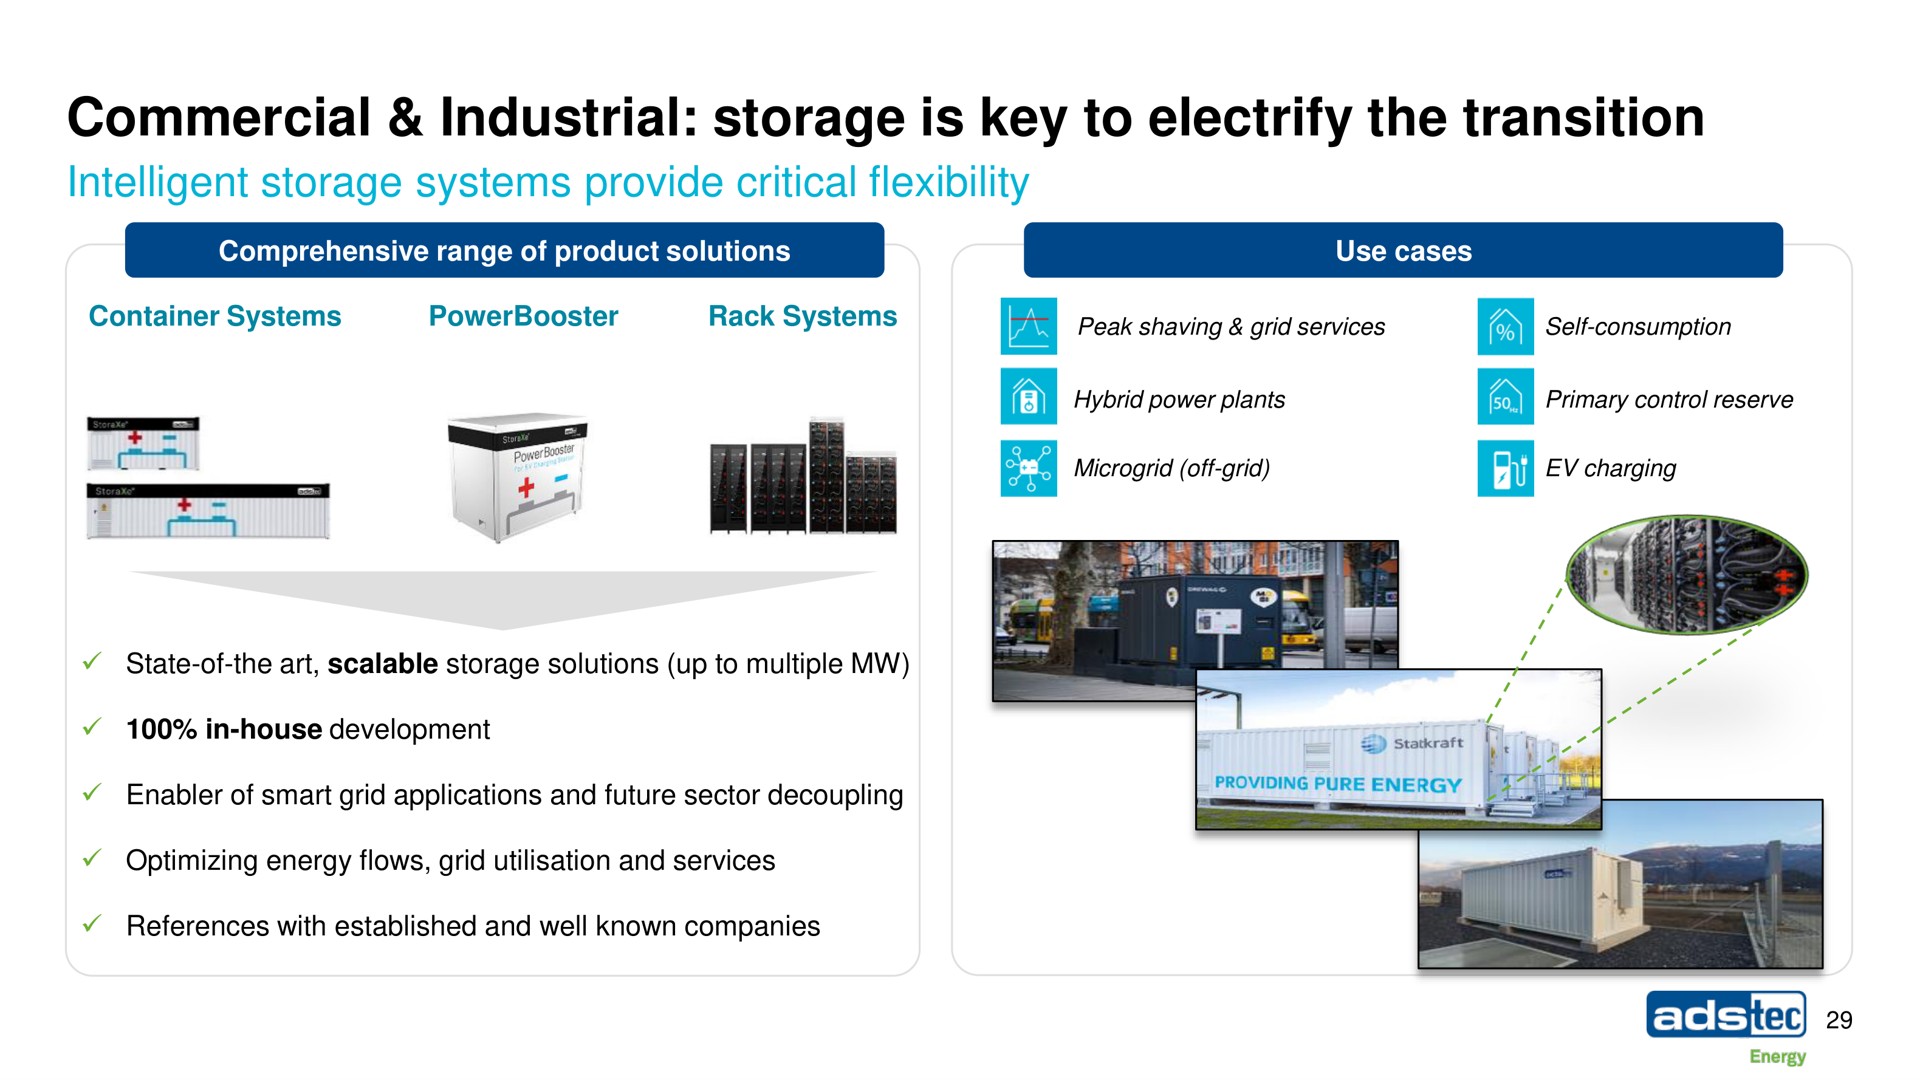 commercial industrial storage is key to electrify the transition tec | ads-tec Energy